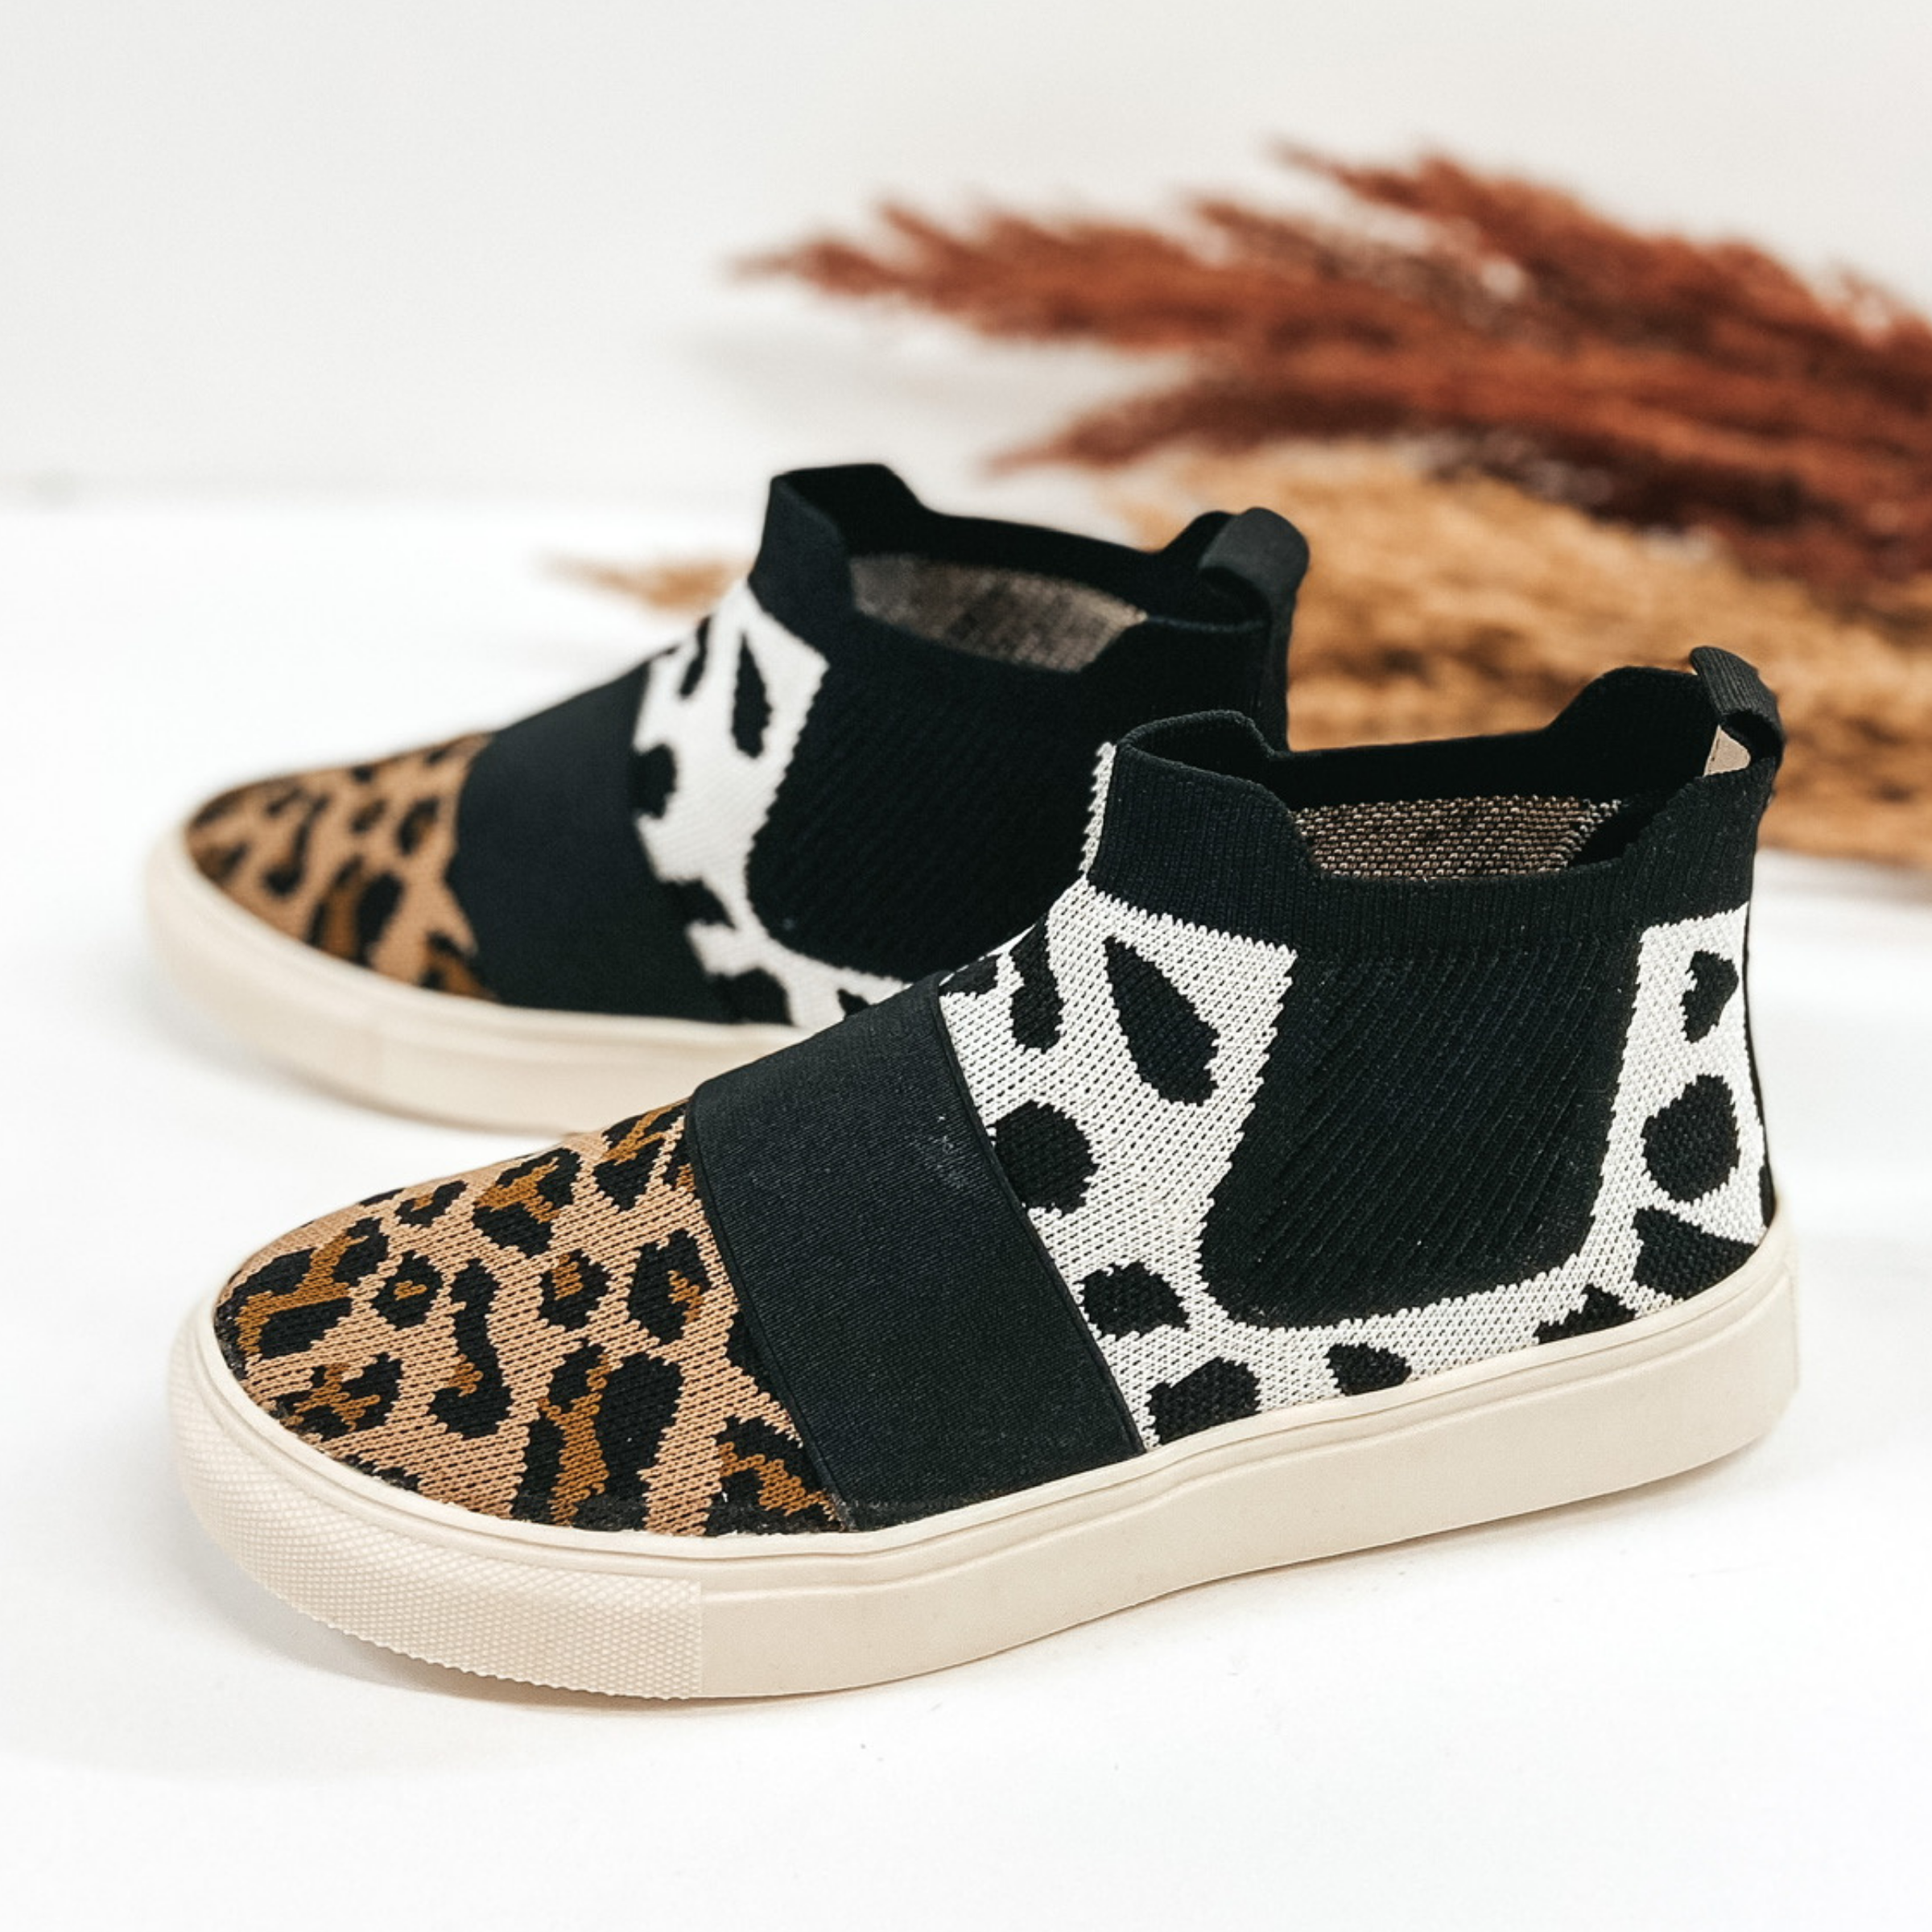 High top knit sneakers that are a white dotted print on the upper and a leopard print around the toe. Pictured on white background with pampus grass.